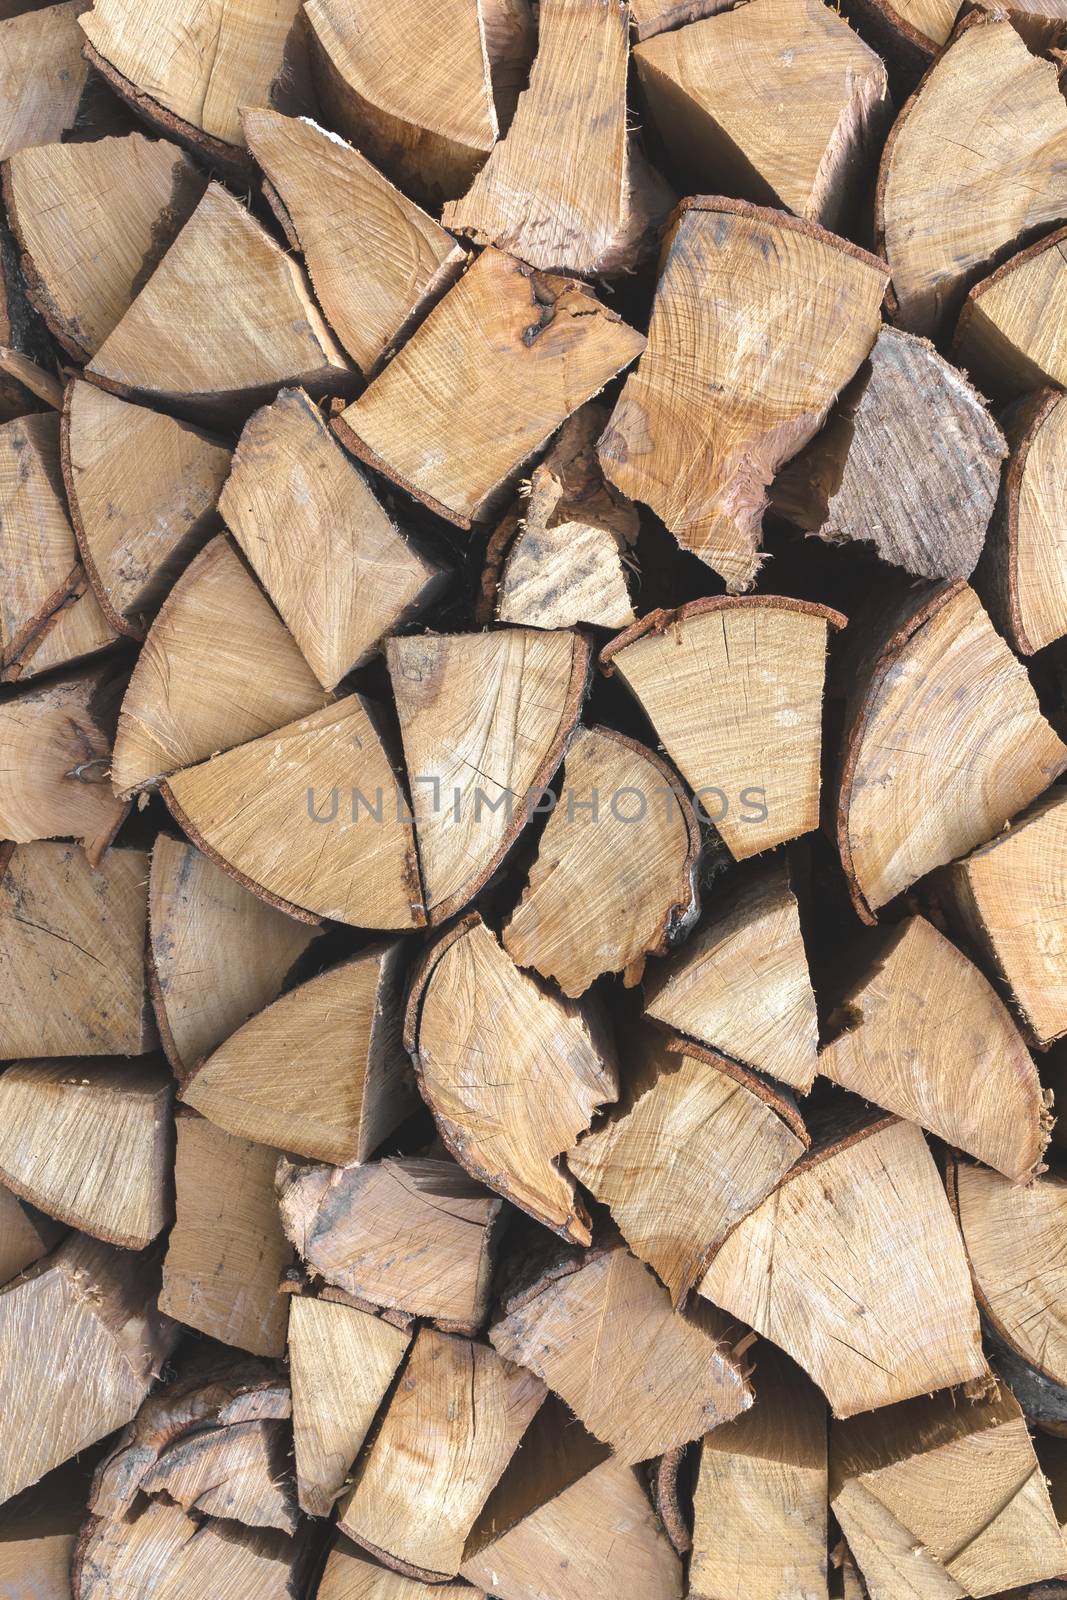 Firewood background. Background of firewood dry and rough, cut in small pieces.